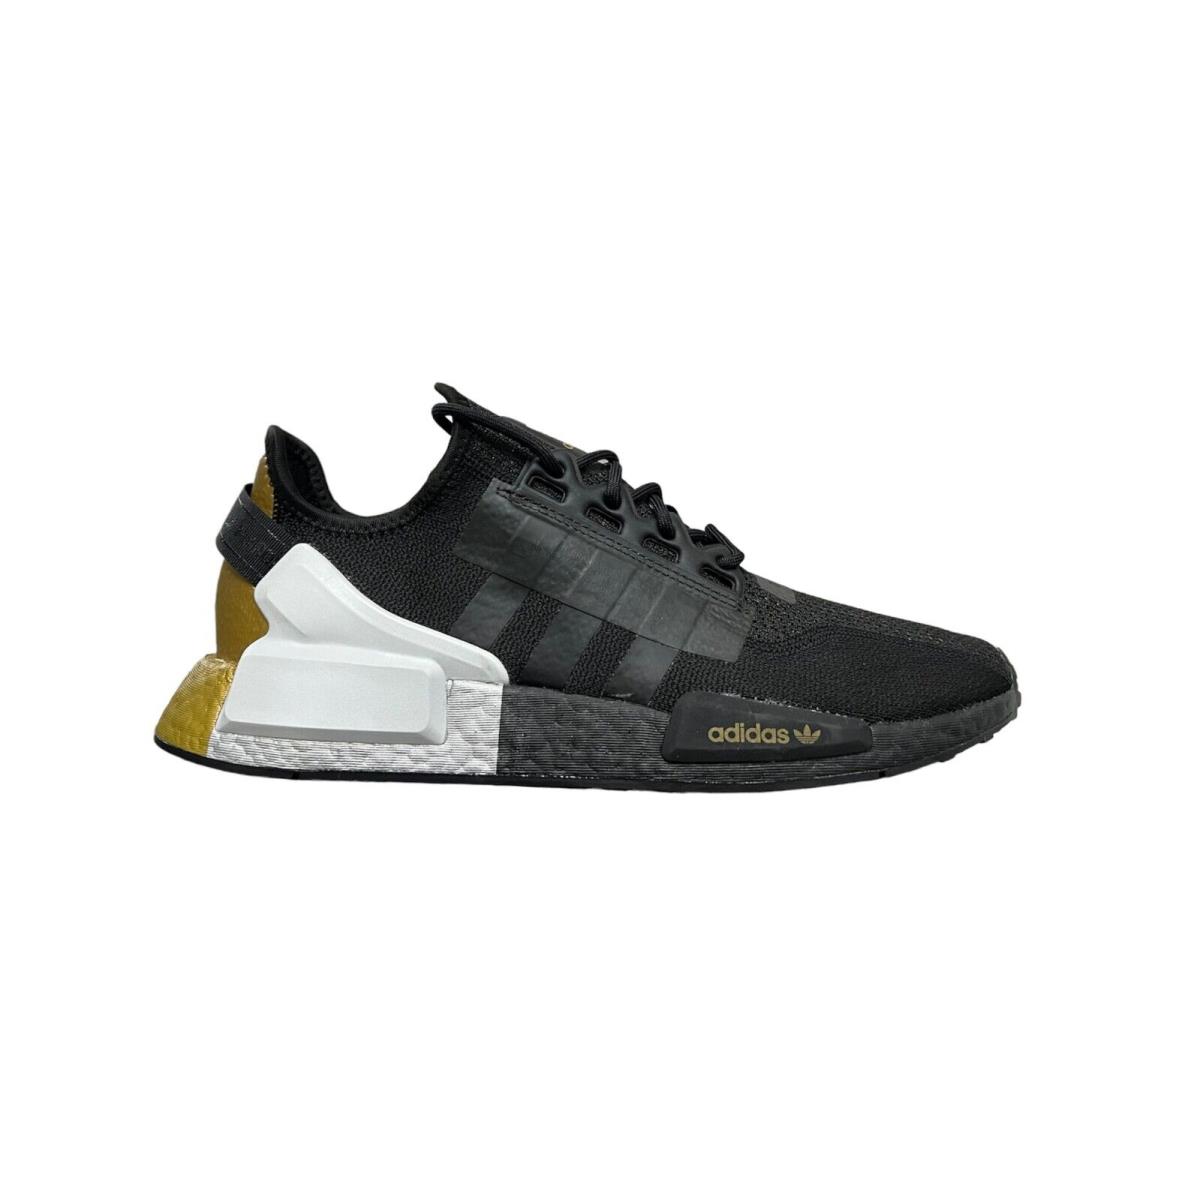 Adidas NMD_R1.V2 Shoes FY1141 Core Black / Gold Metallic Mens Size 9.5